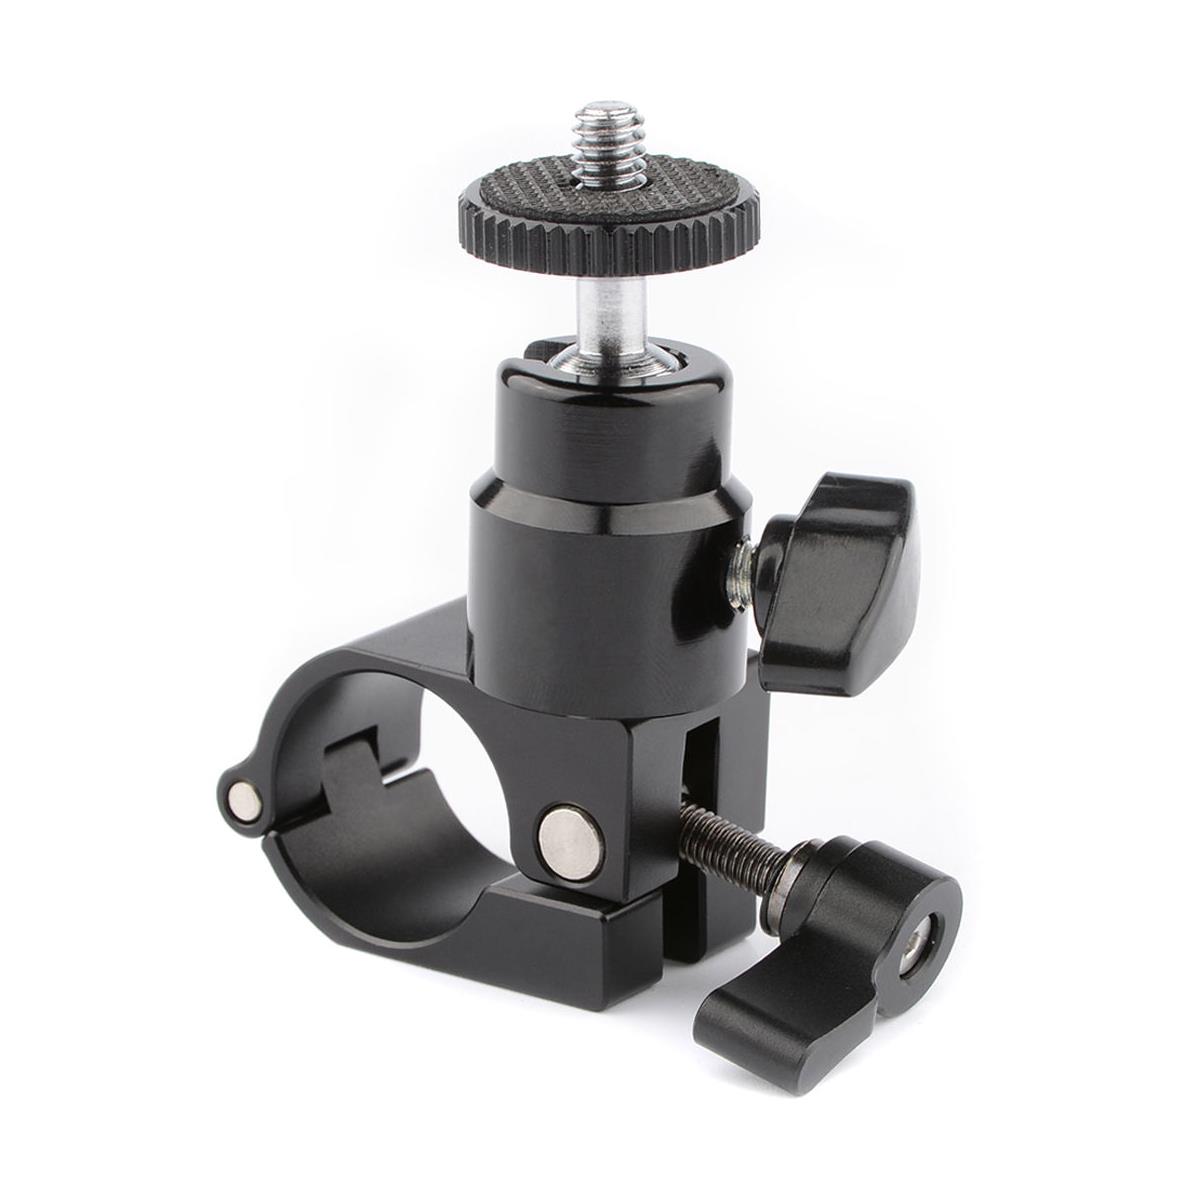 

CAMVATE 25mm Rod Clamp with Ball Head Monitor Mount, Black Knob